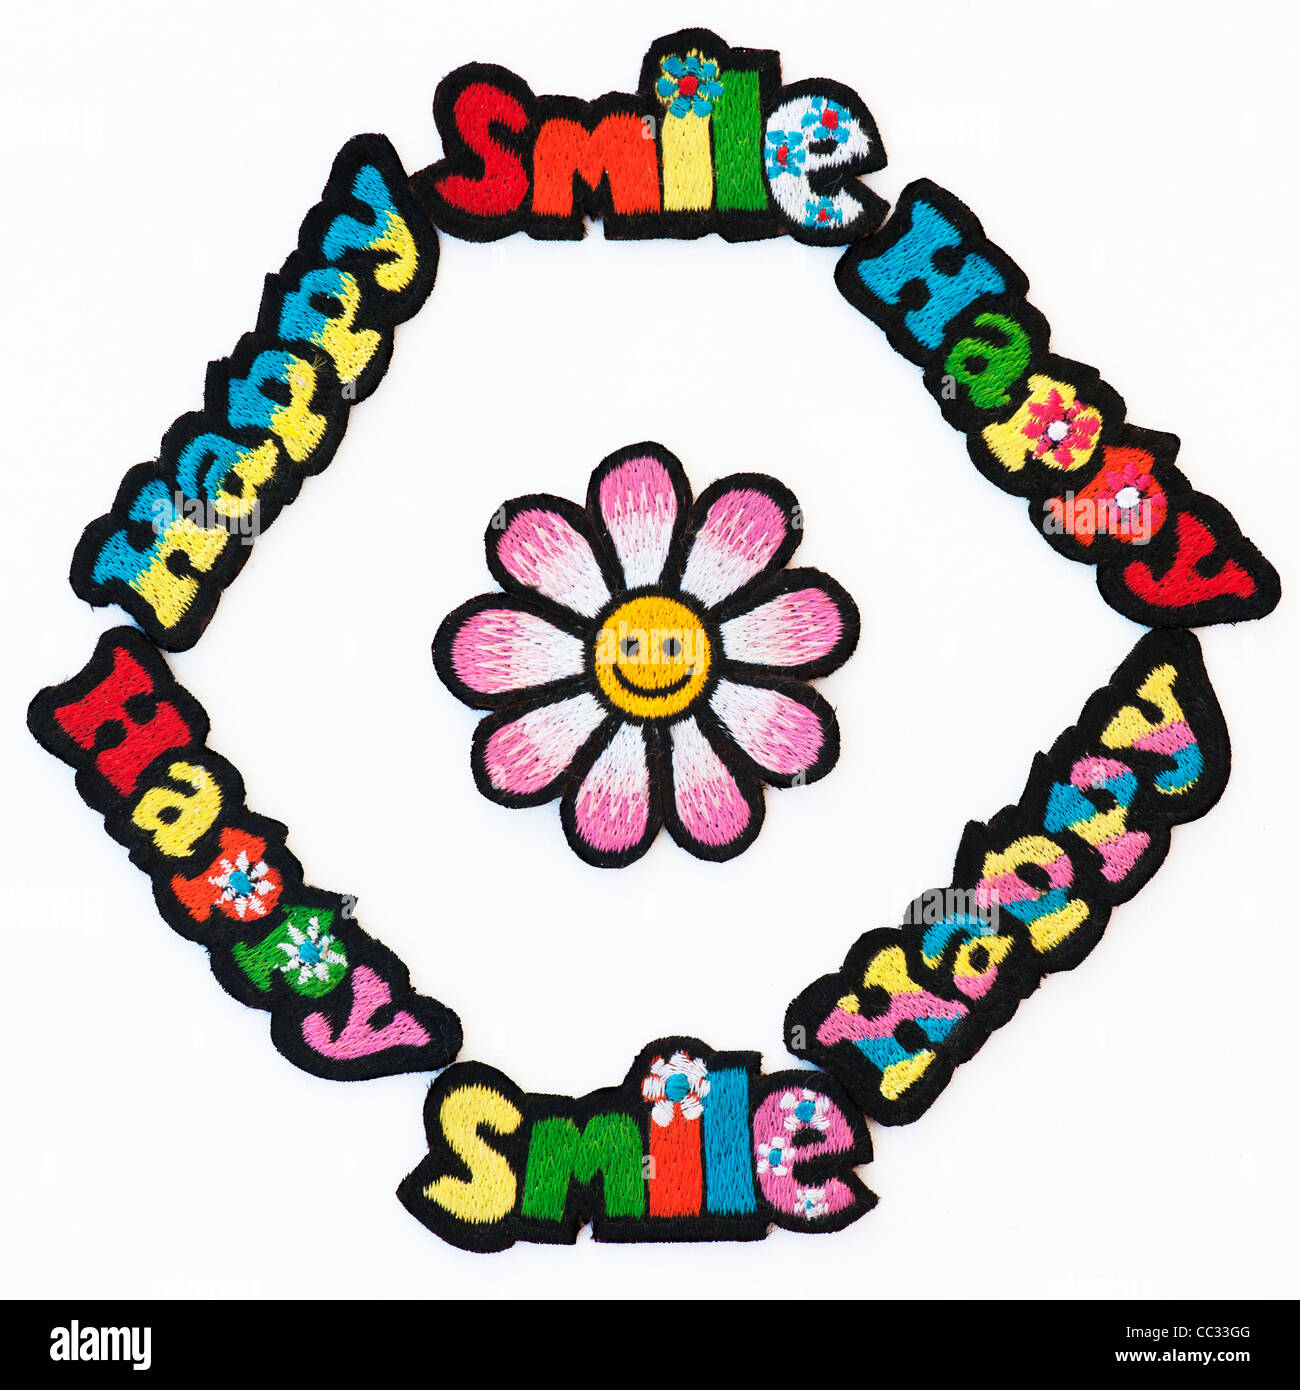 Embroidery iron on patches of Multicoloured Happy and Smile words with a smiley face flower on a white background Stock Photo